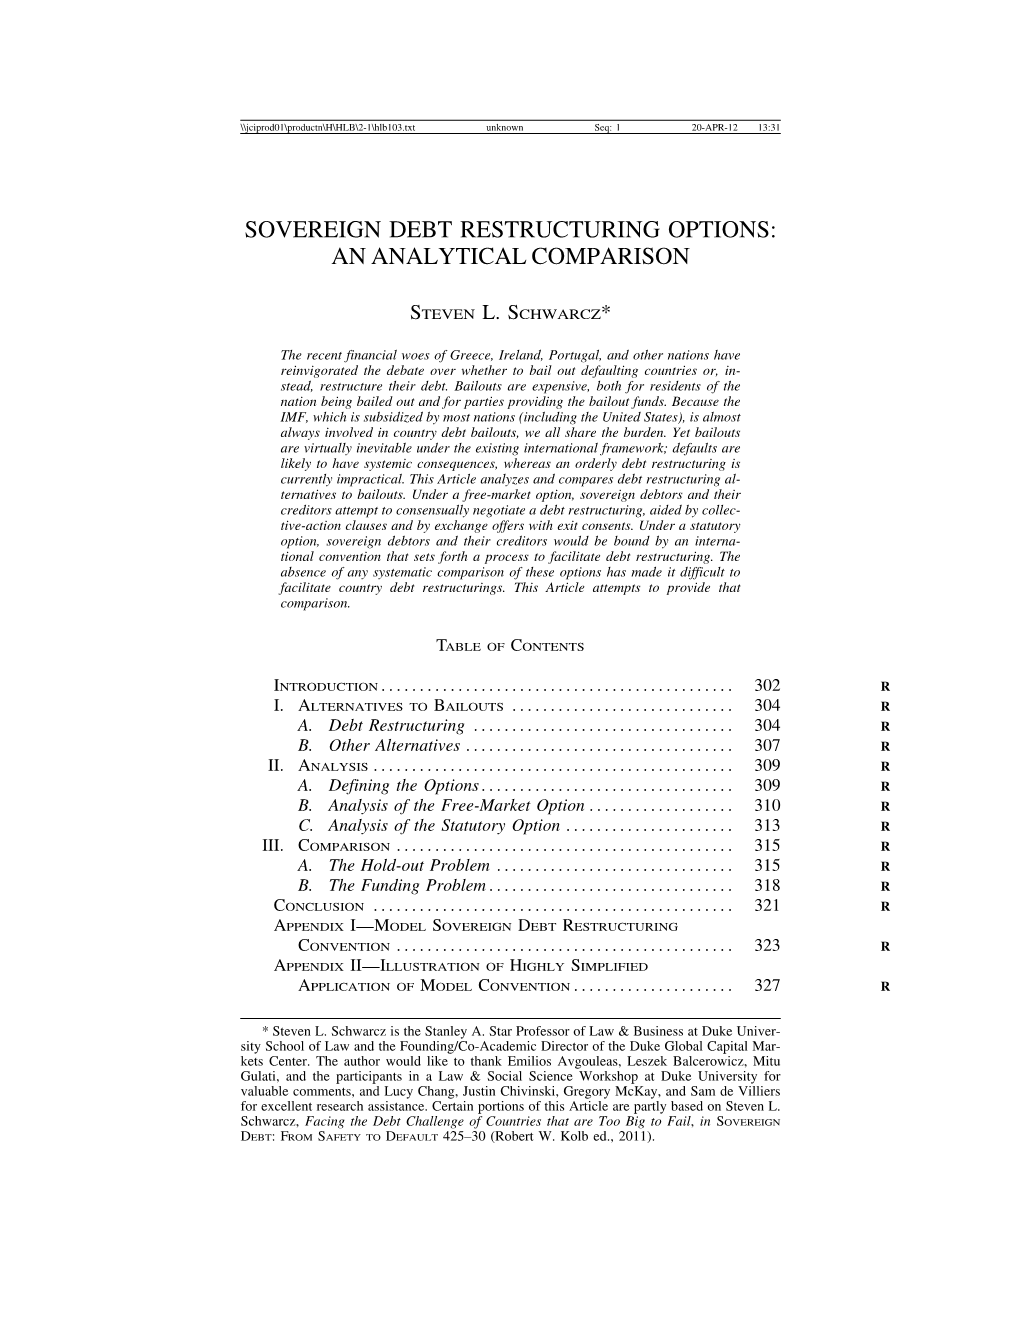 Sovereign Debt Restructuring Options: an Analytical Comparison